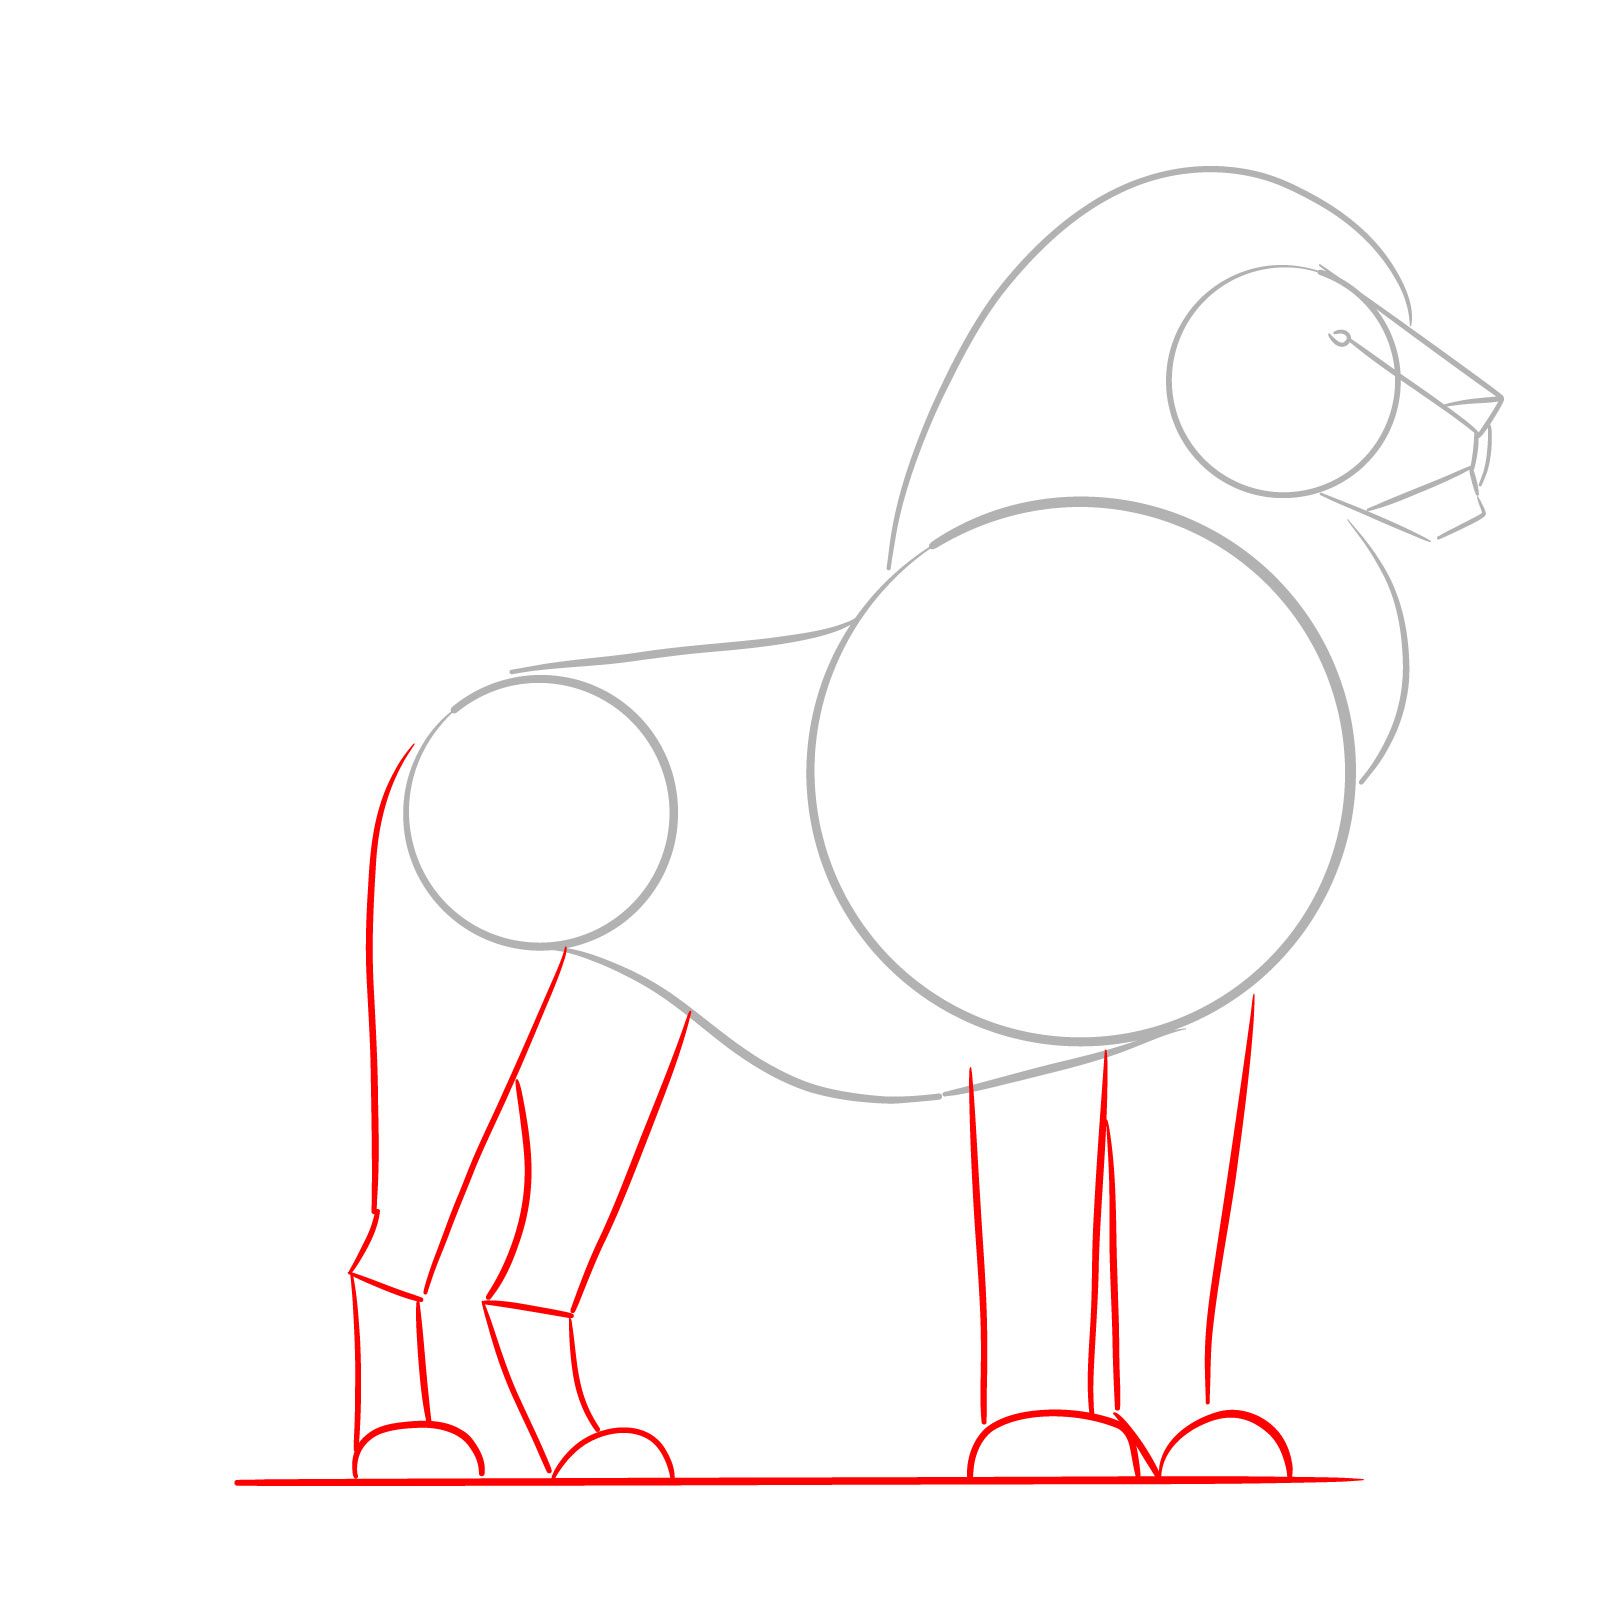 Basic shapes for the legs in a standing lion drawing instruction - step 03